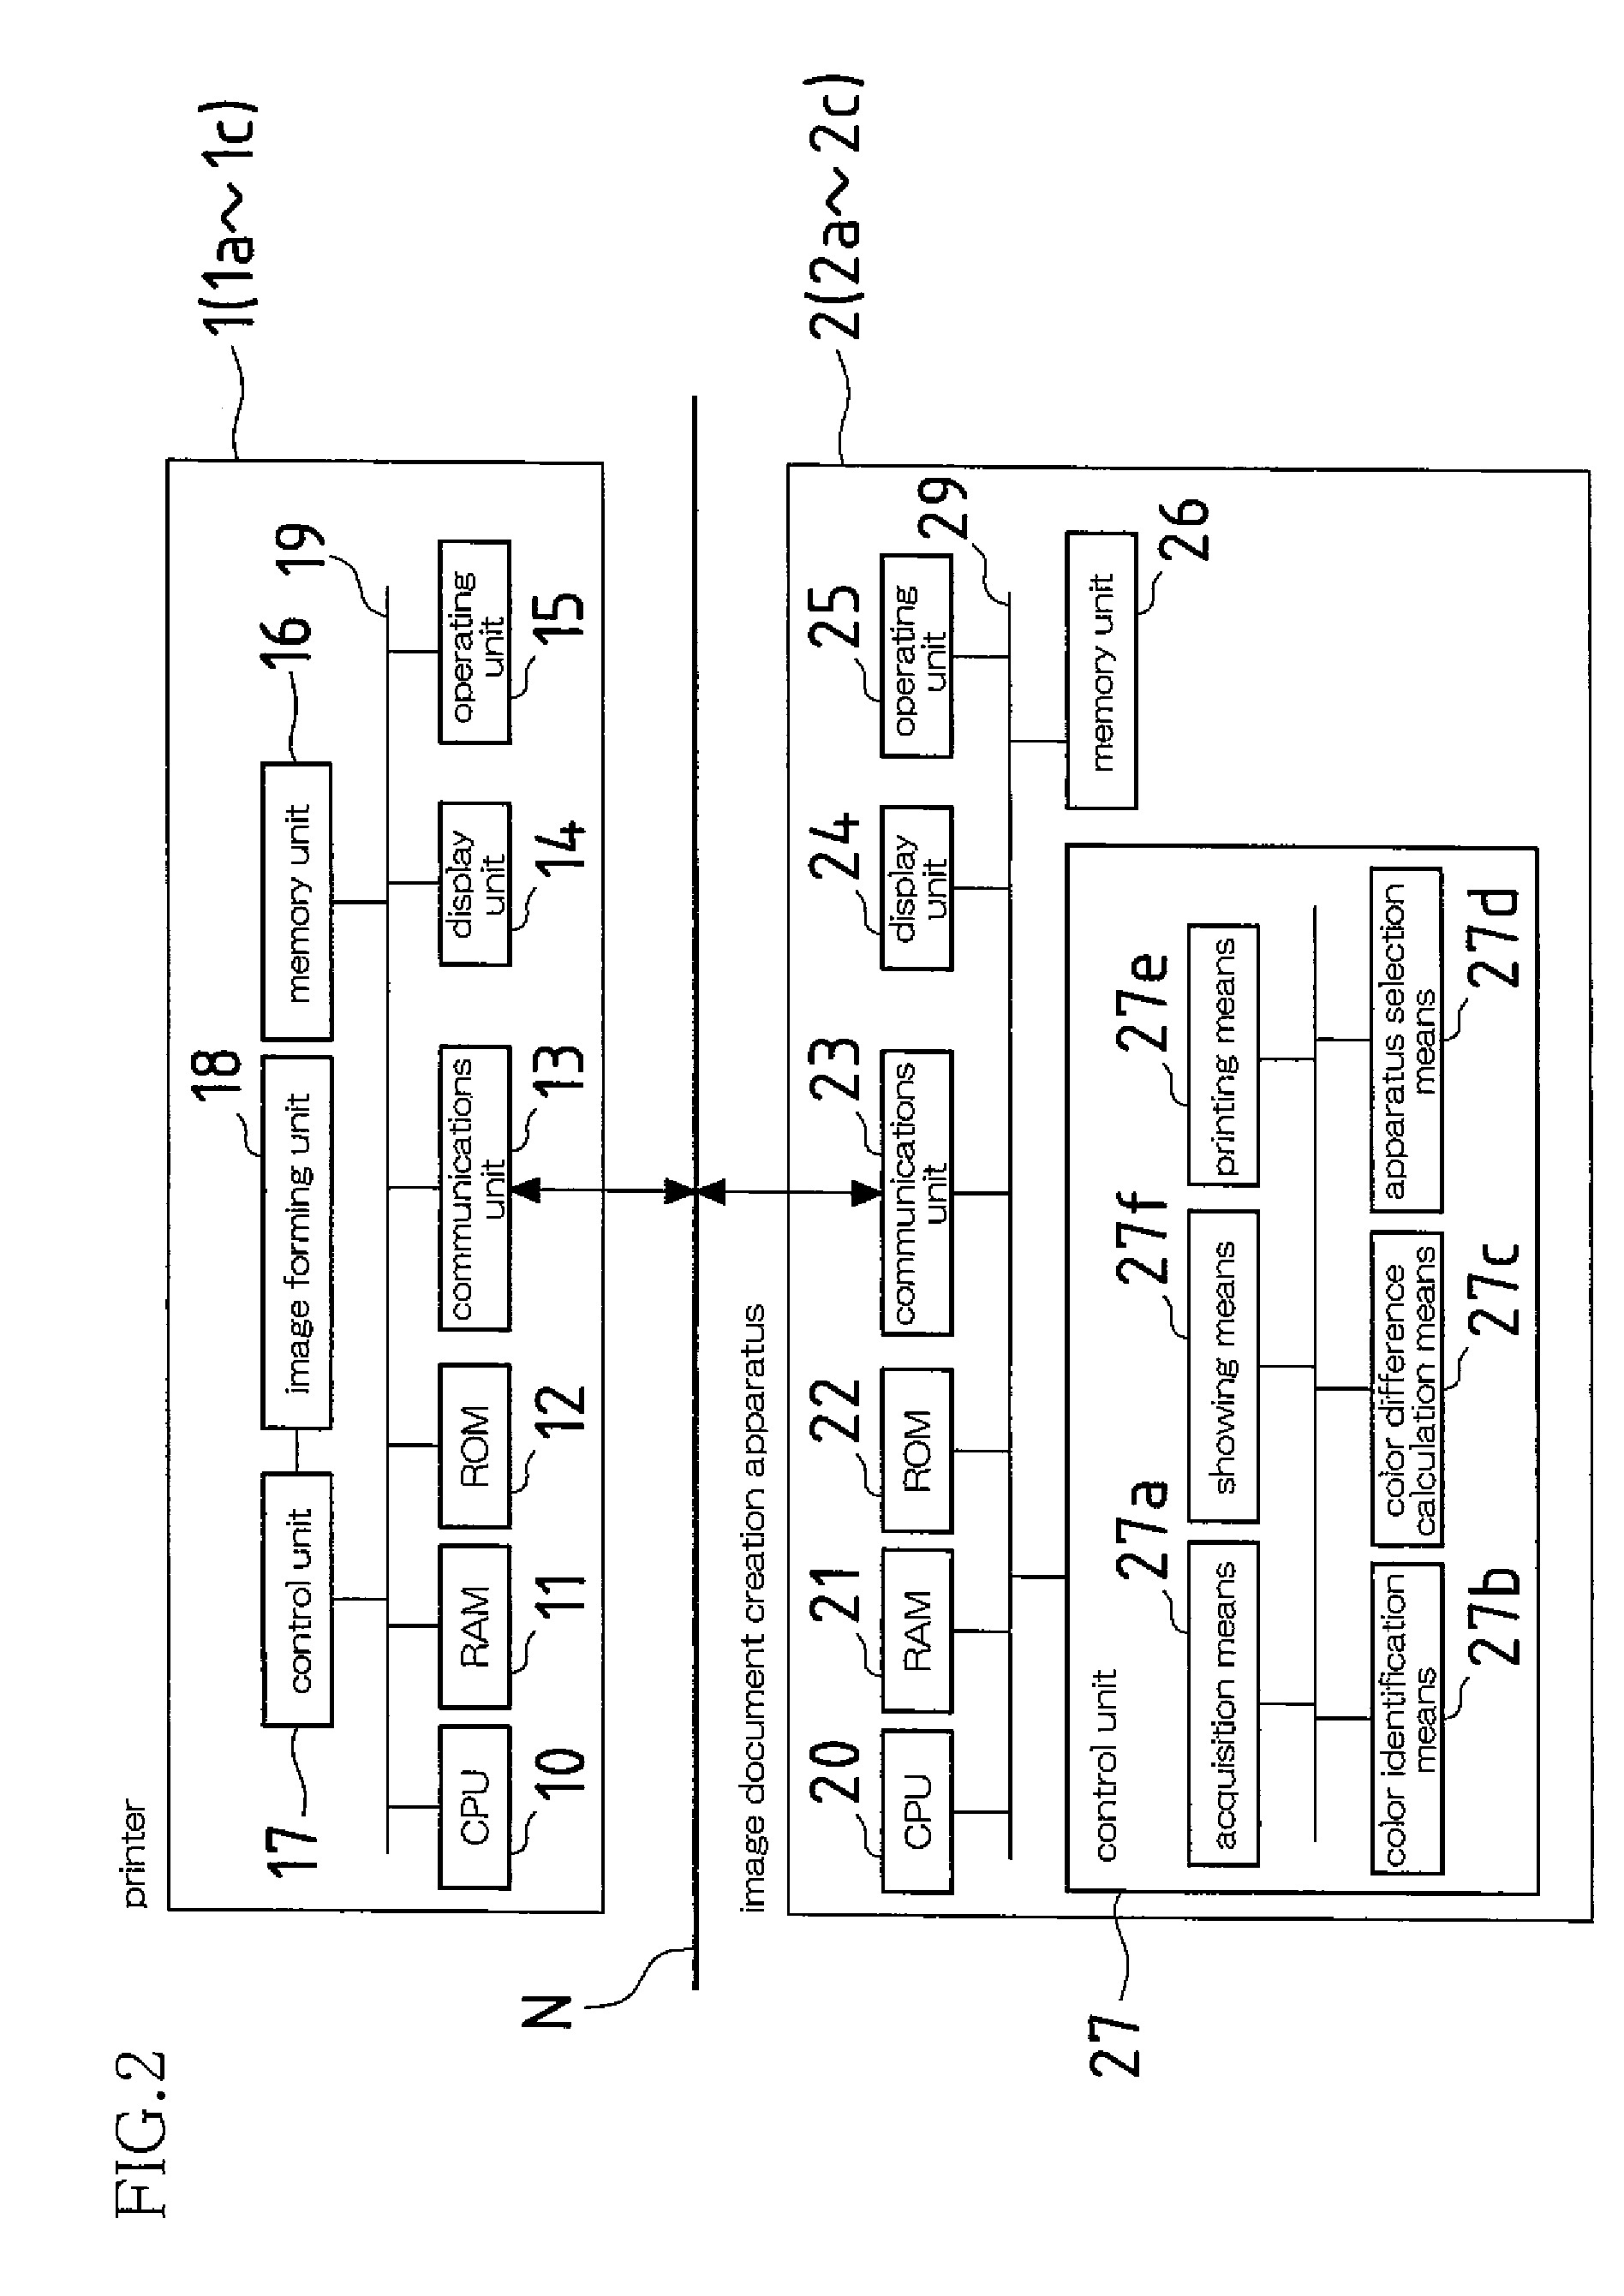 Image document creation device, method for printing image document, program for printing image document, and recording medium